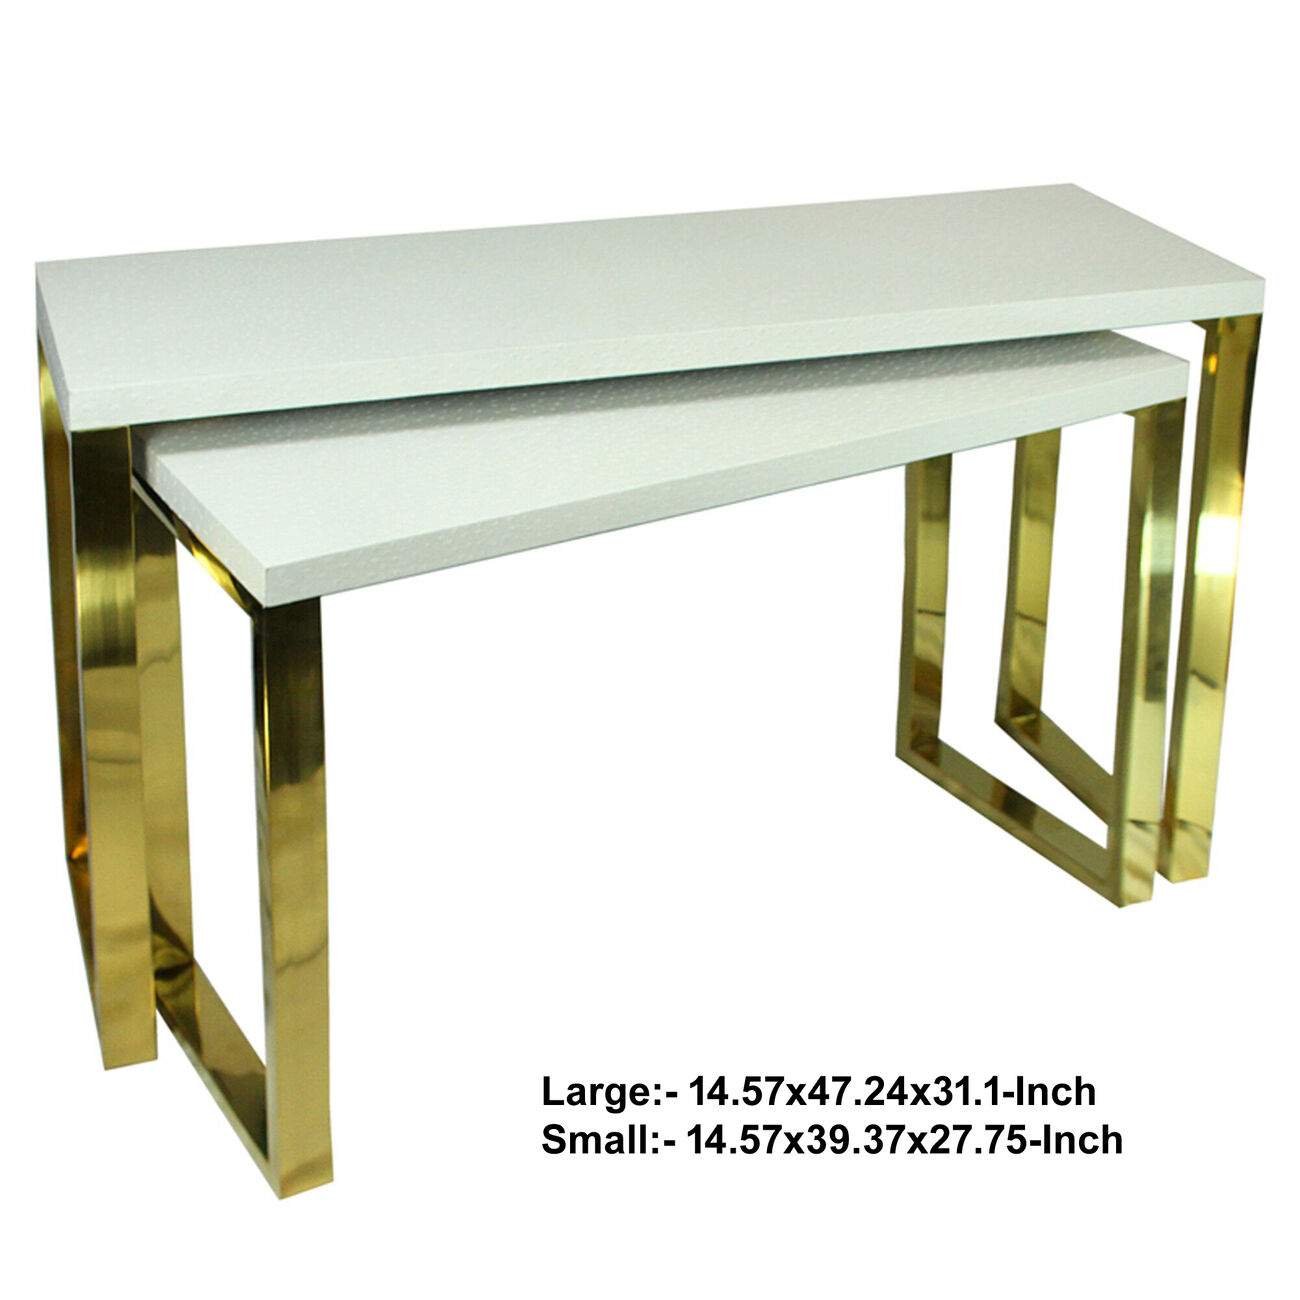 Rectangular Wood and Metal Console Tables, White and Gold, Set of 2.